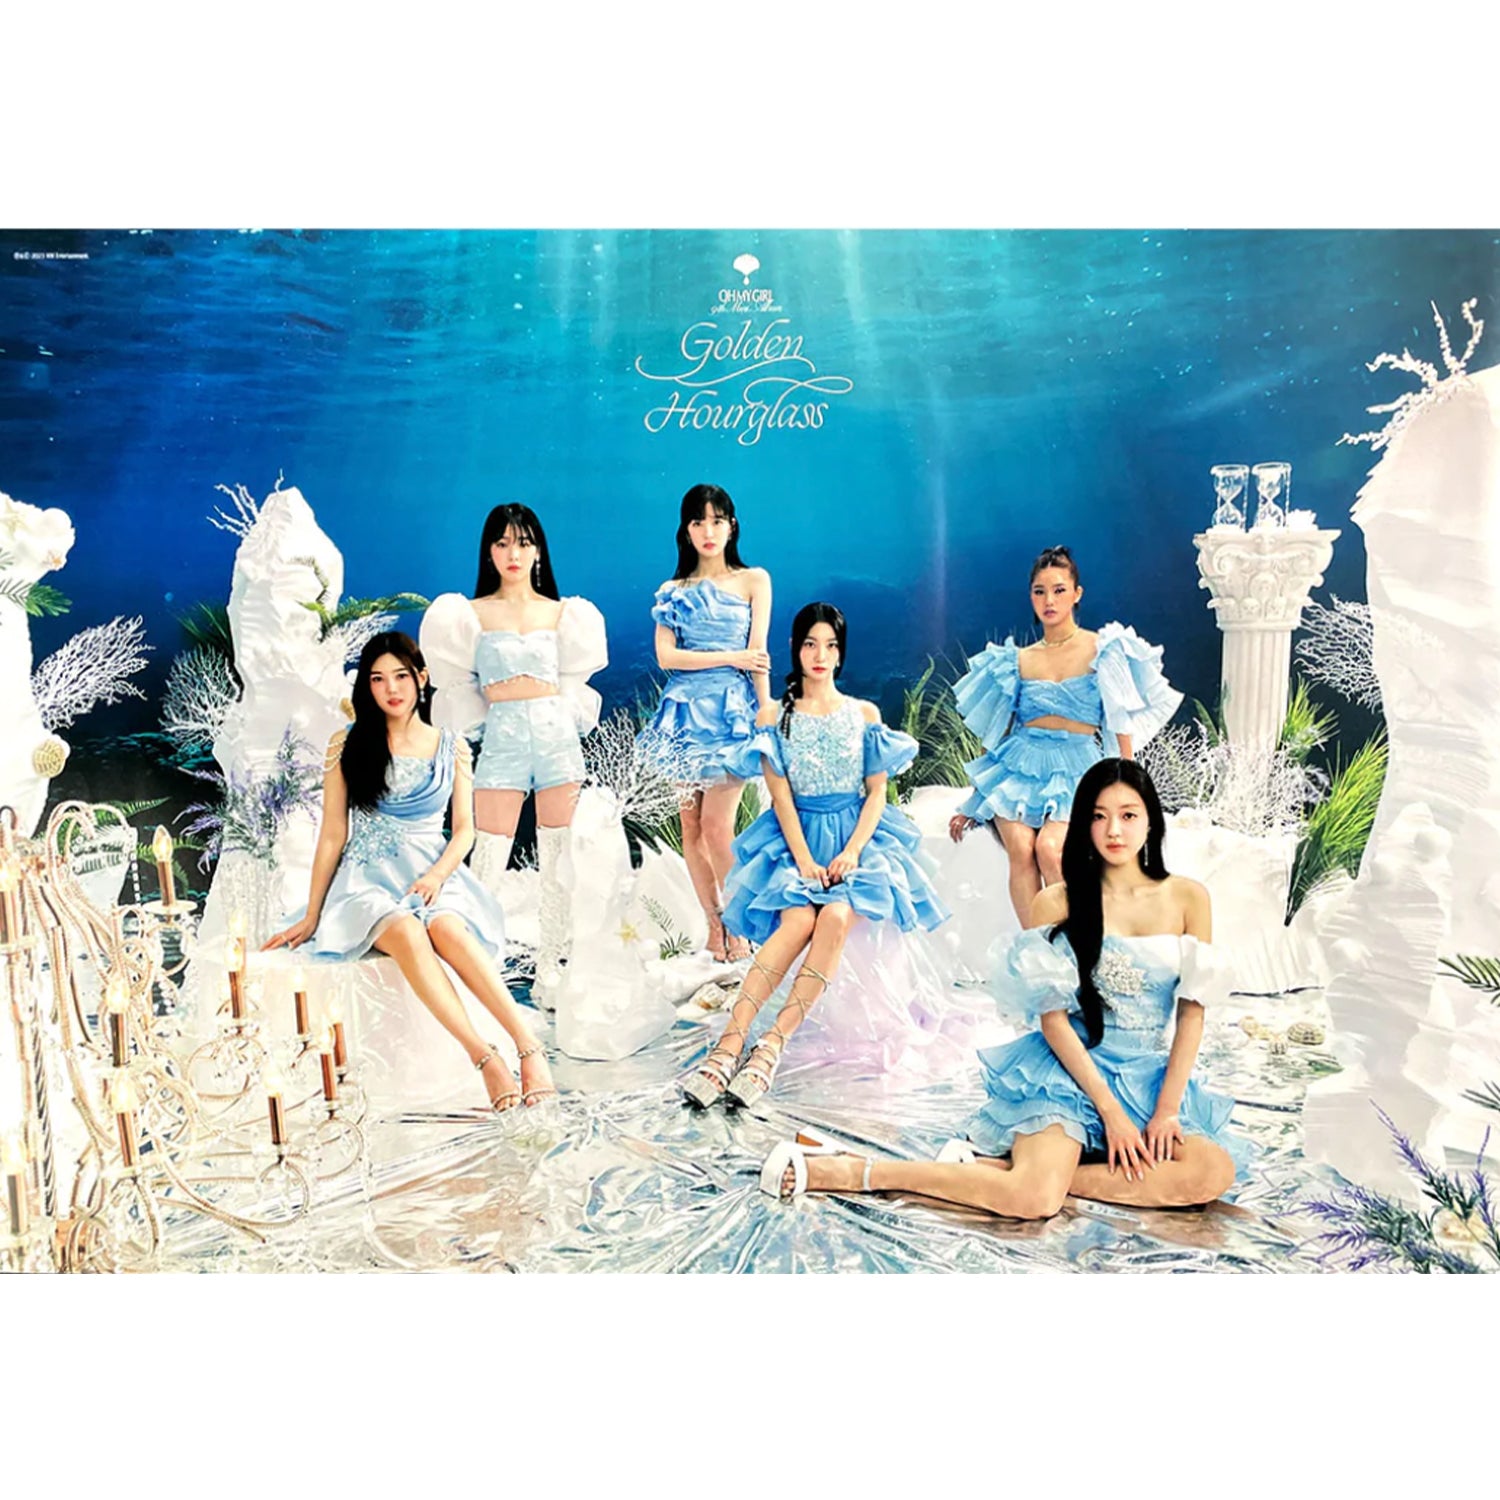 OH MY GIRL 9TH MINI ALBUM 'GOLDEN HOURGLASS' POSTER ONLY WAVE VERSION COVER